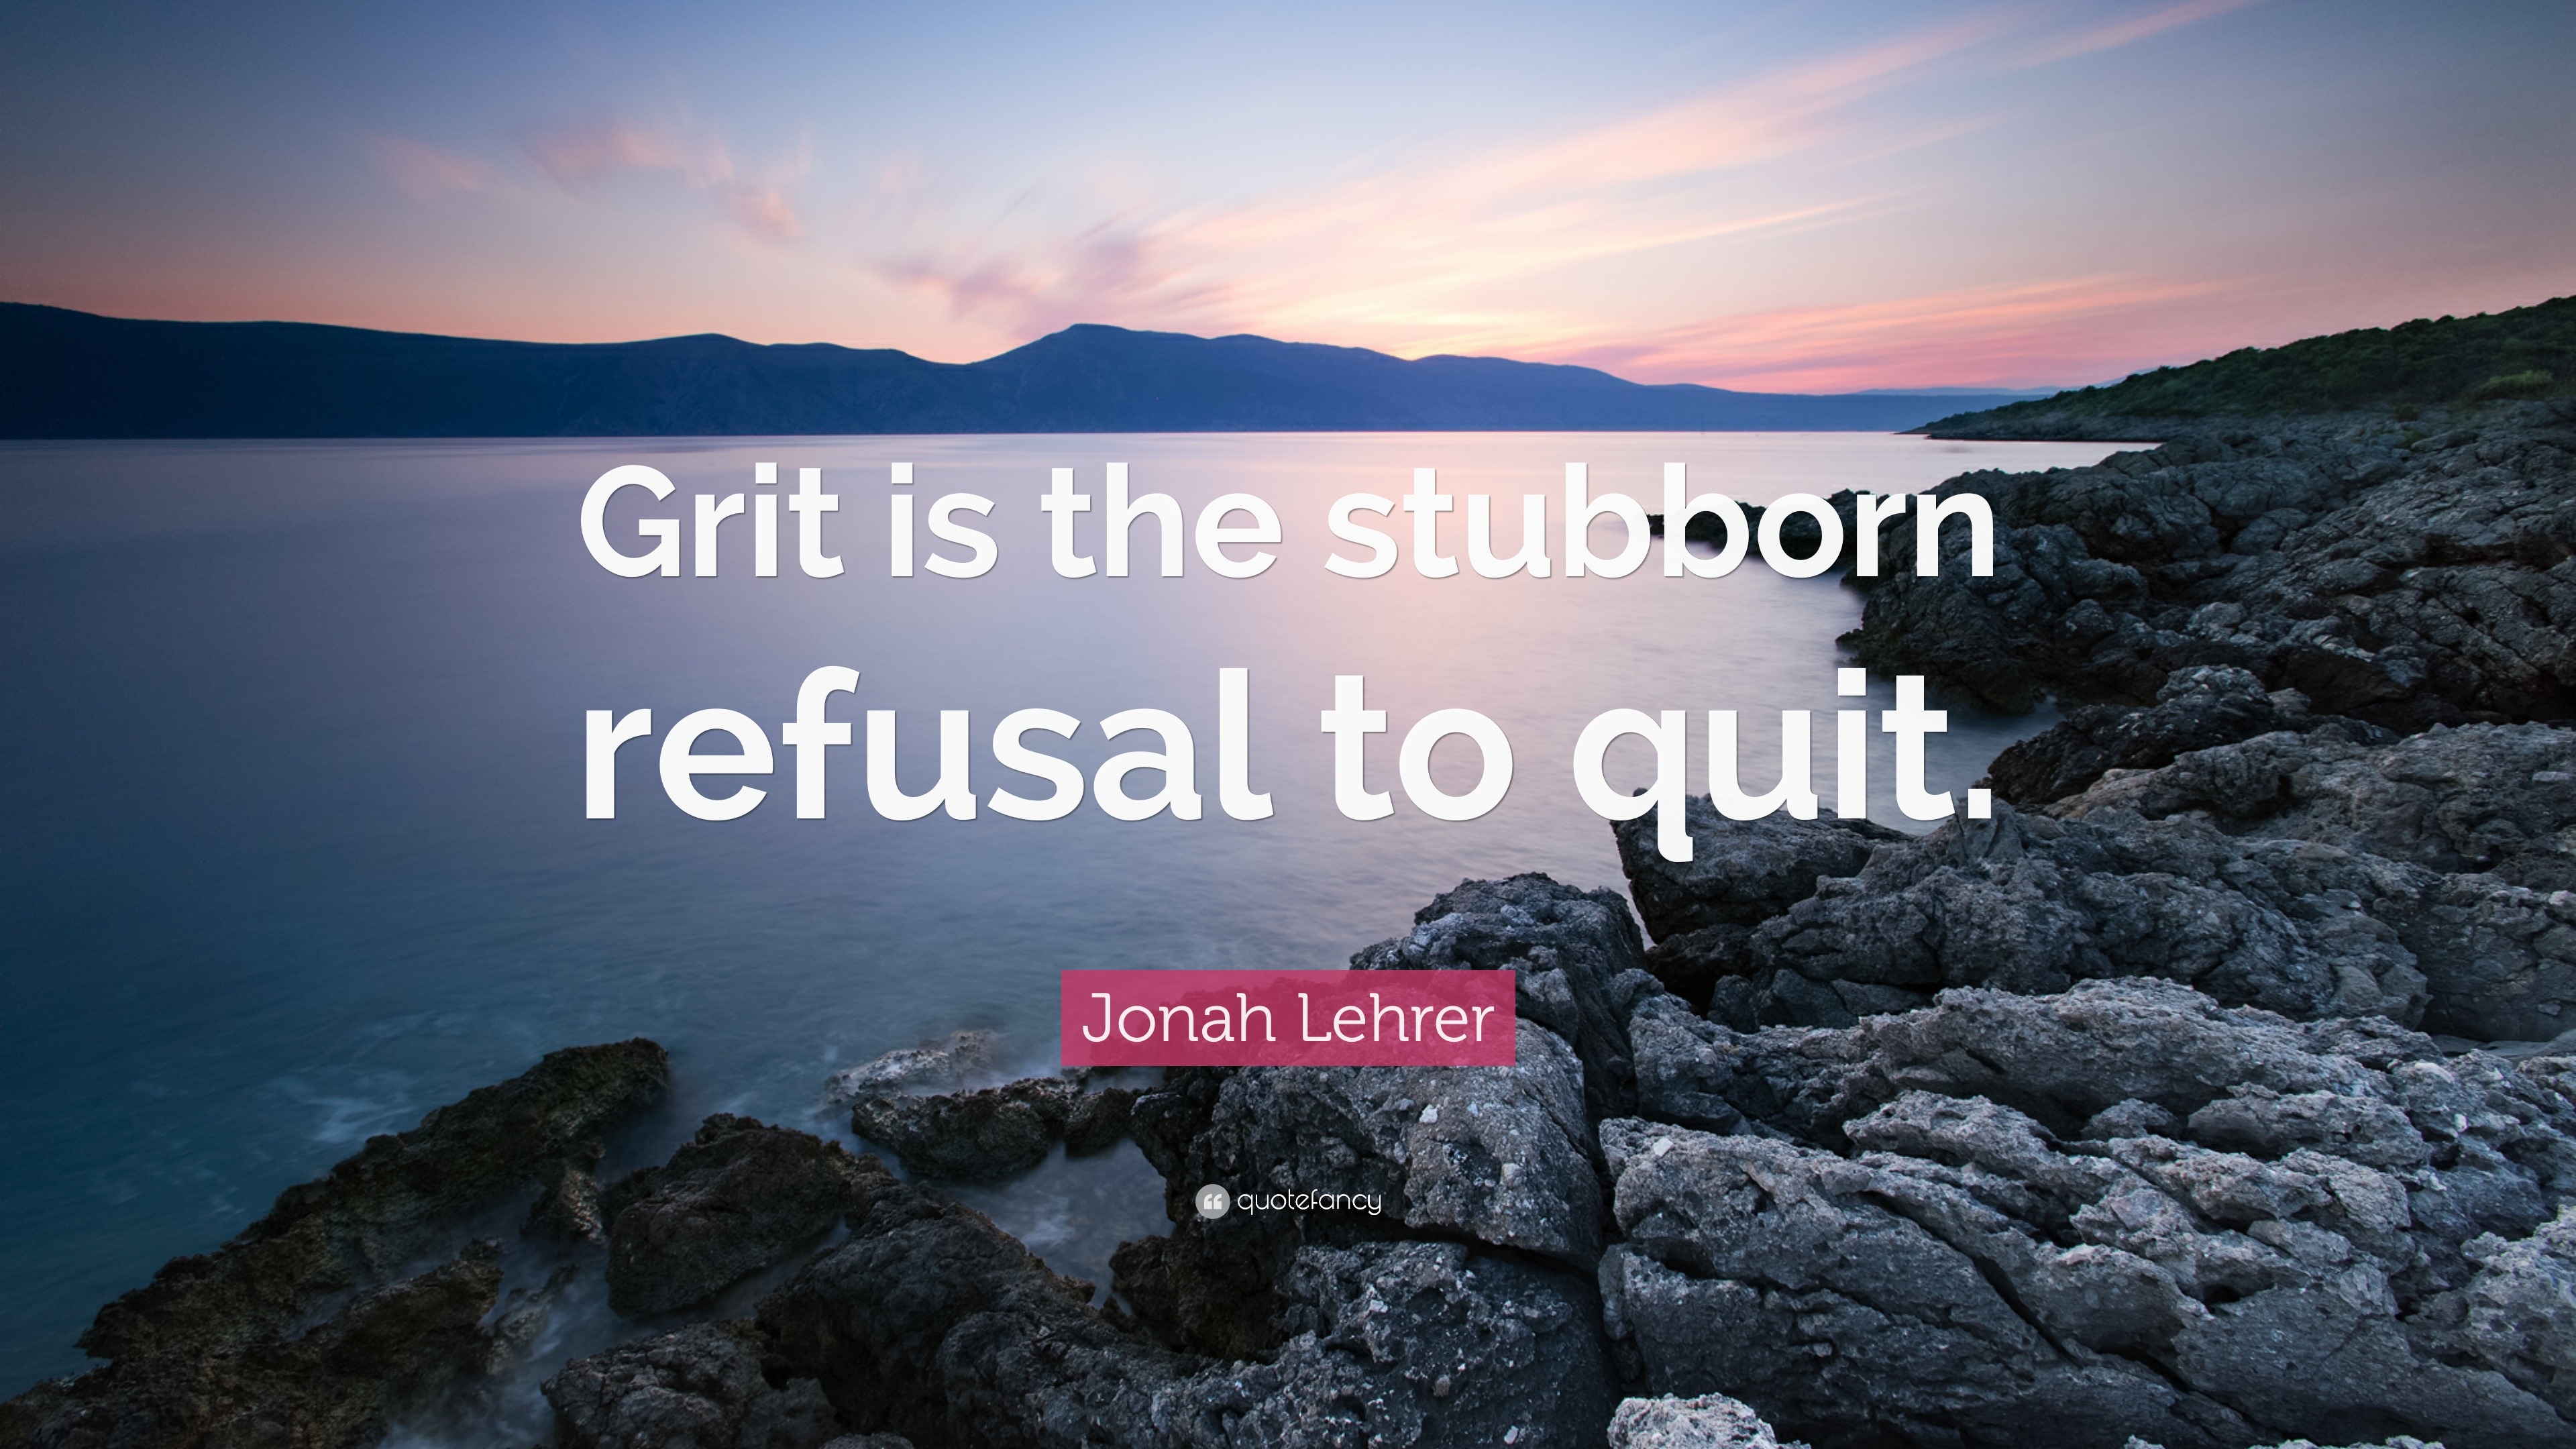 610699 Grit is the stubborn refusal to quit  Jonah Lehrer quote  Rare  Gallery HD Wallpapers